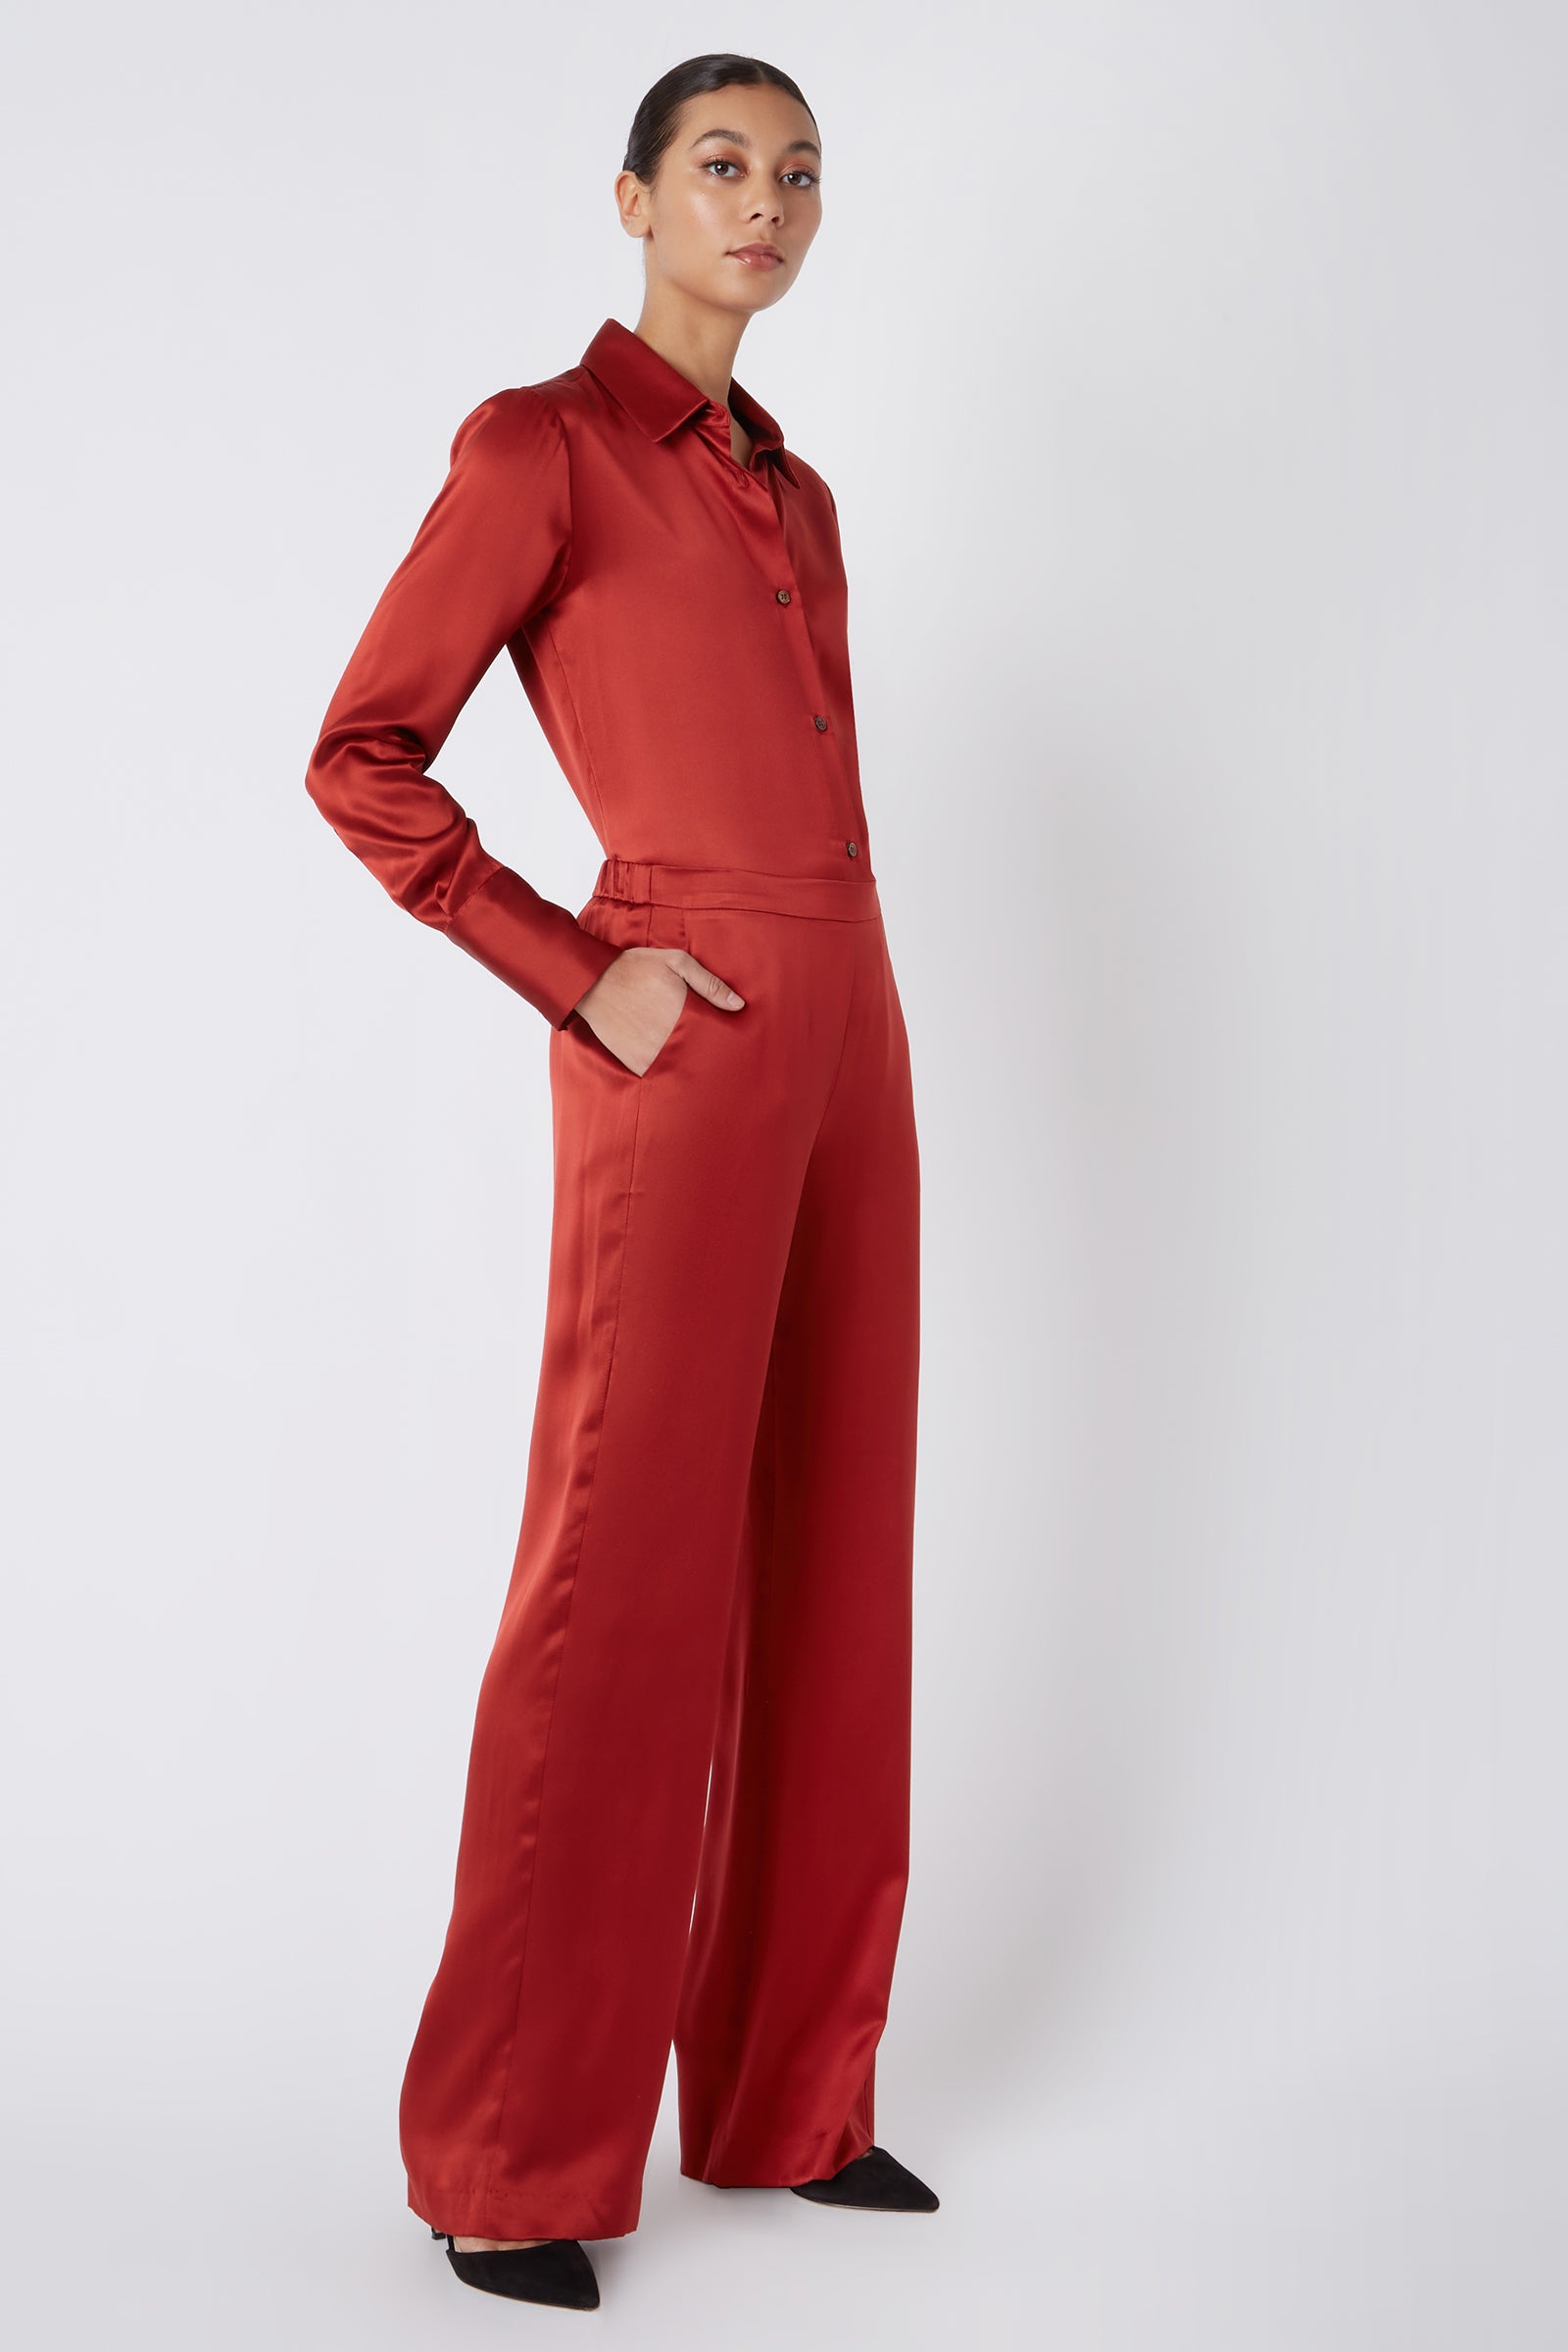 Kal Rieman Classic Silk Trouser in Rust Colored Silk on Model with Hand in Pocket Full Side View